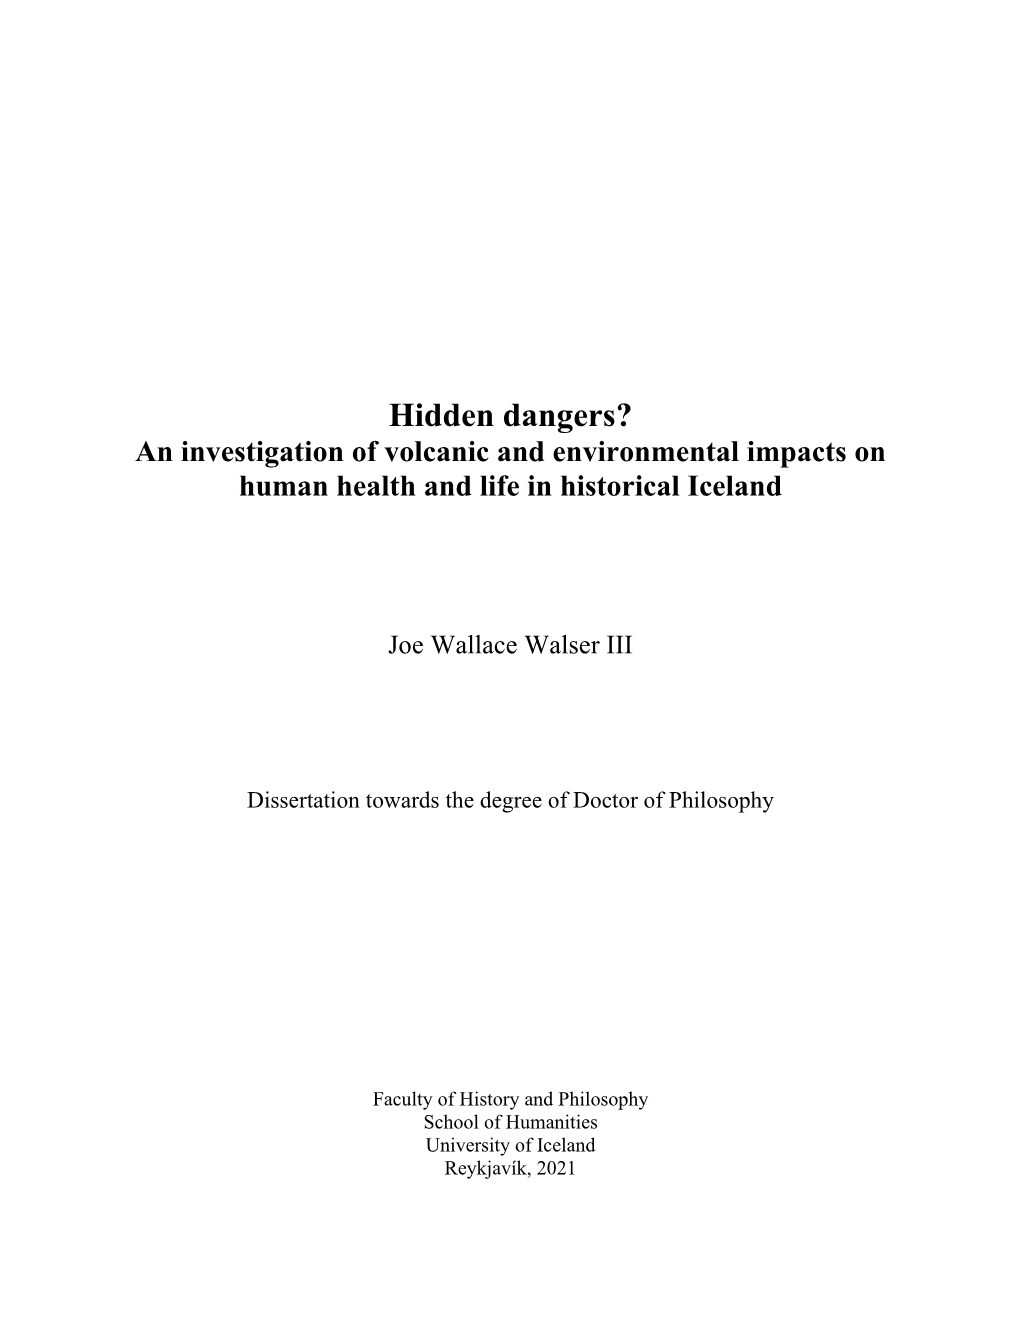 Hidden Dangers? an Investigation of Volcanic and Environmental Impacts on Human Health and Life in Historical Iceland